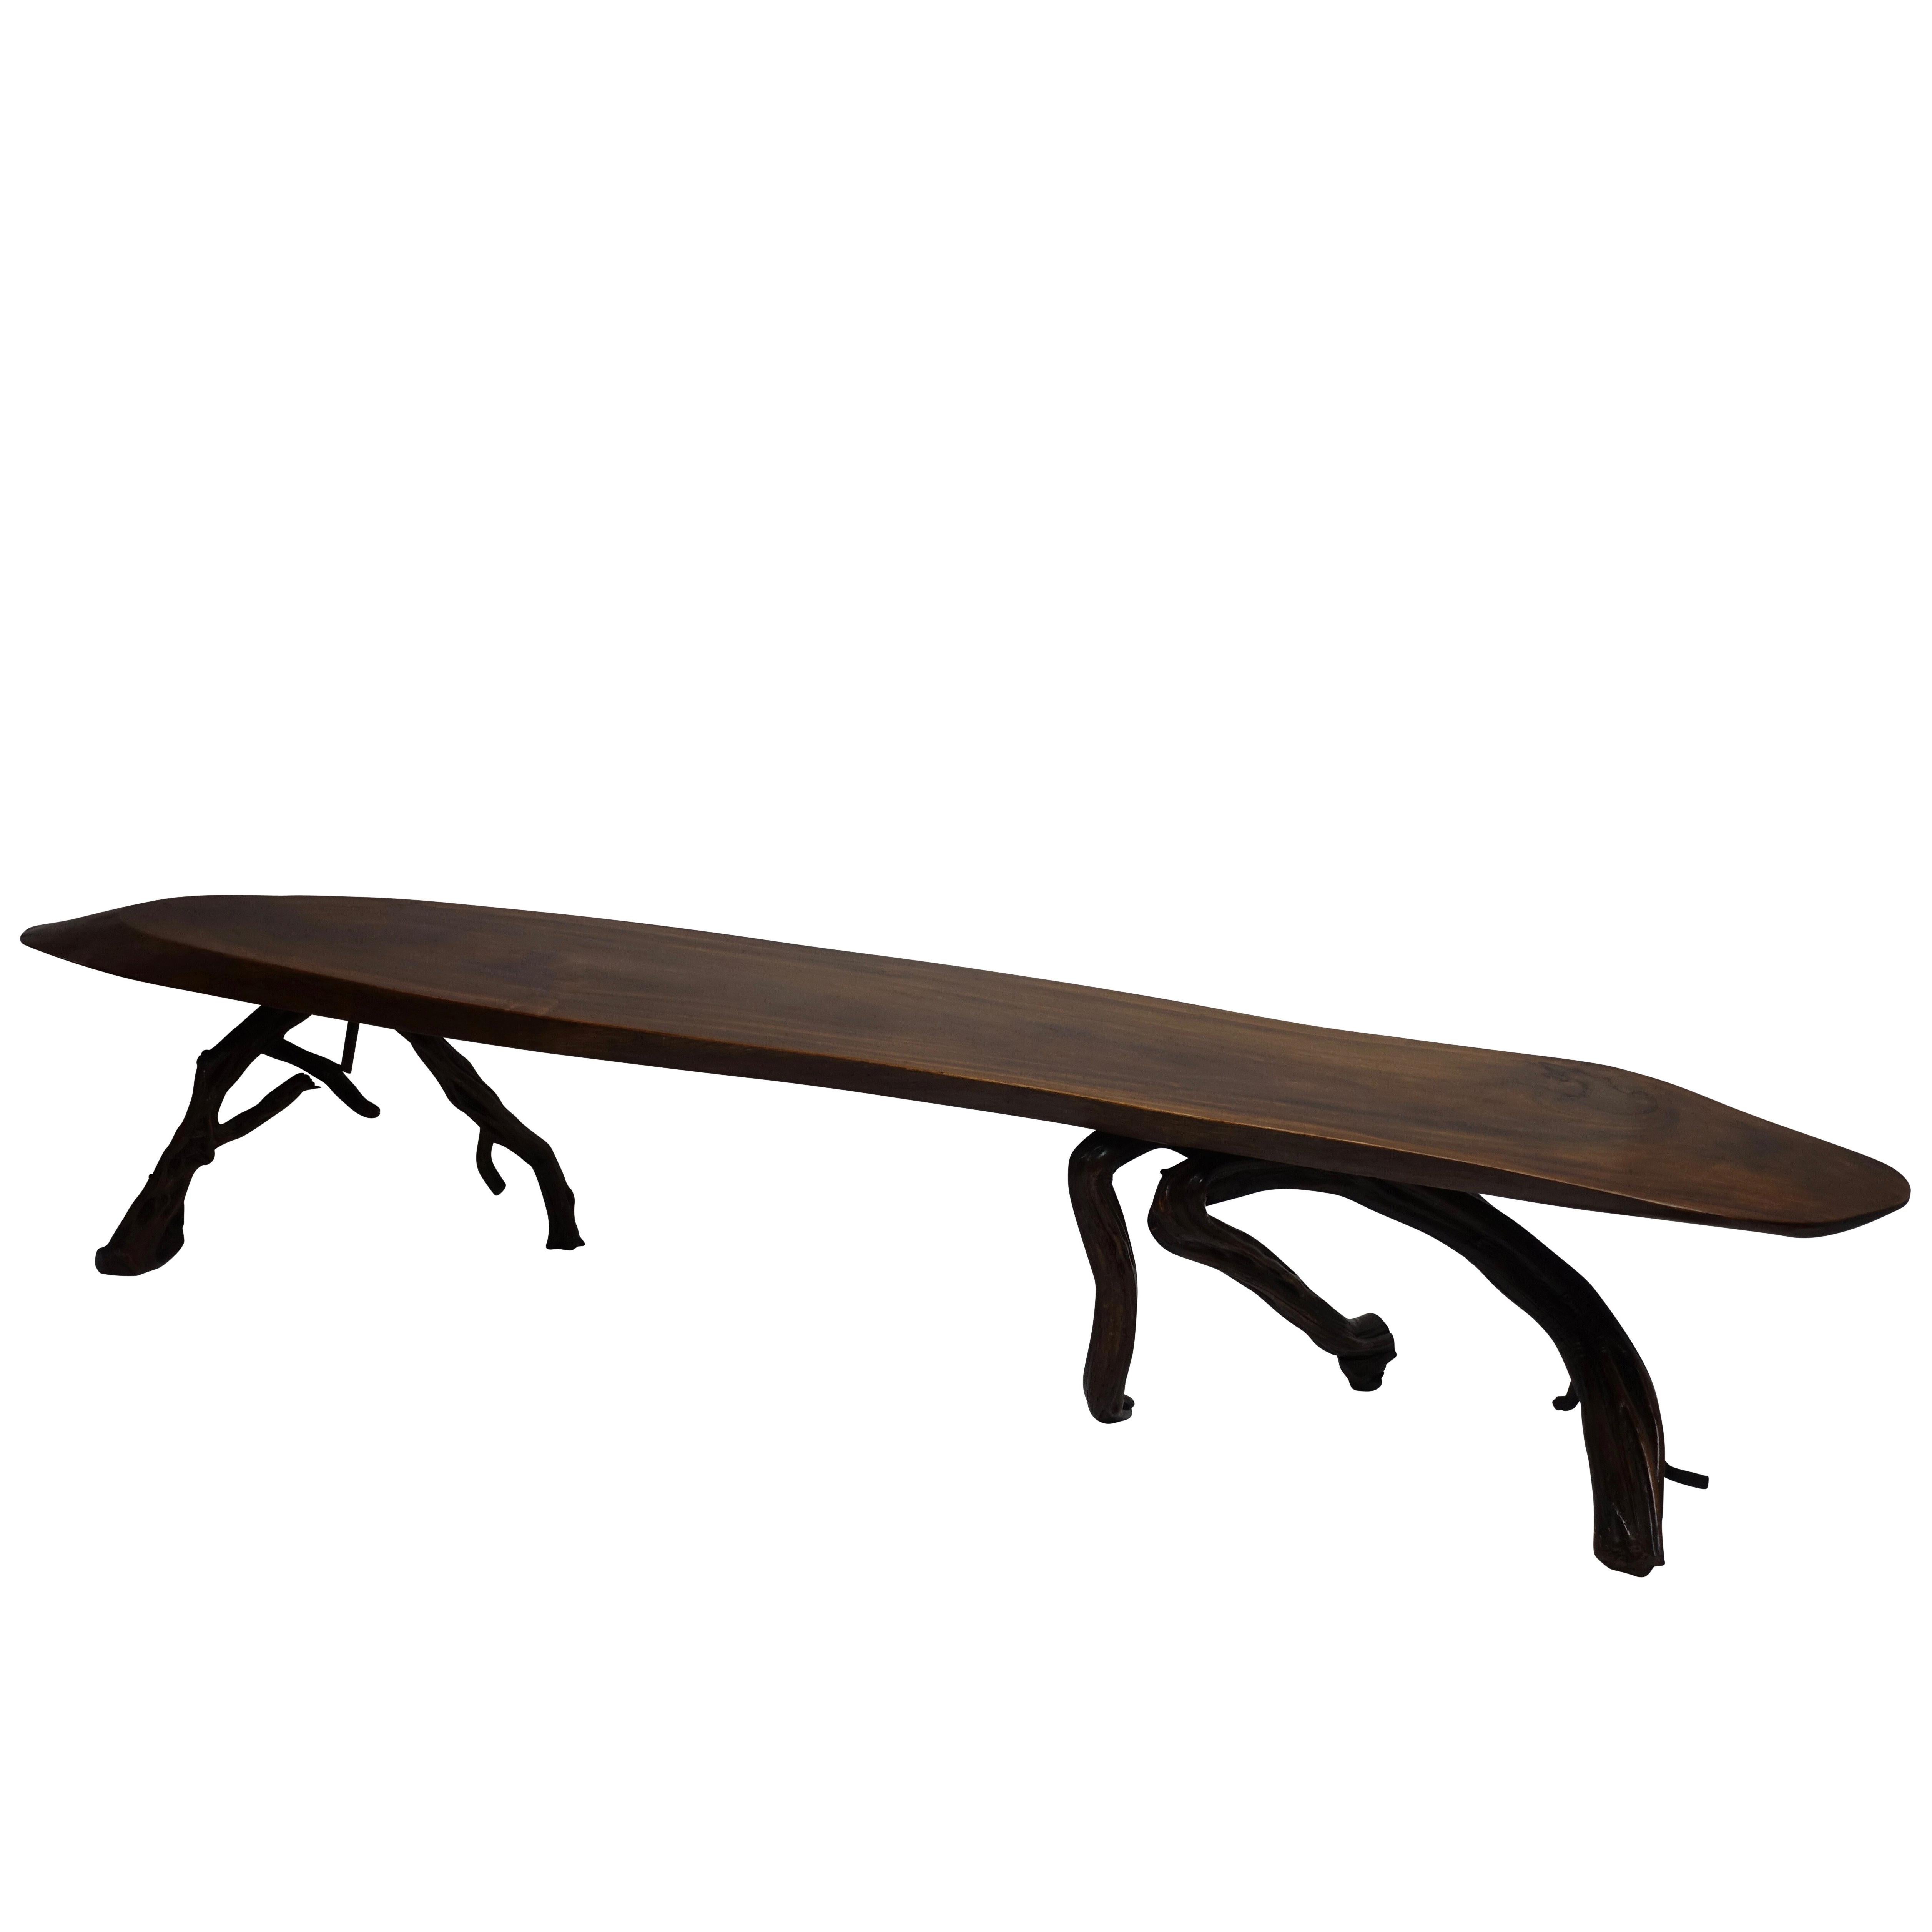 Large Walnut Slab Coffee Table, American, Mid-20th Century For Sale